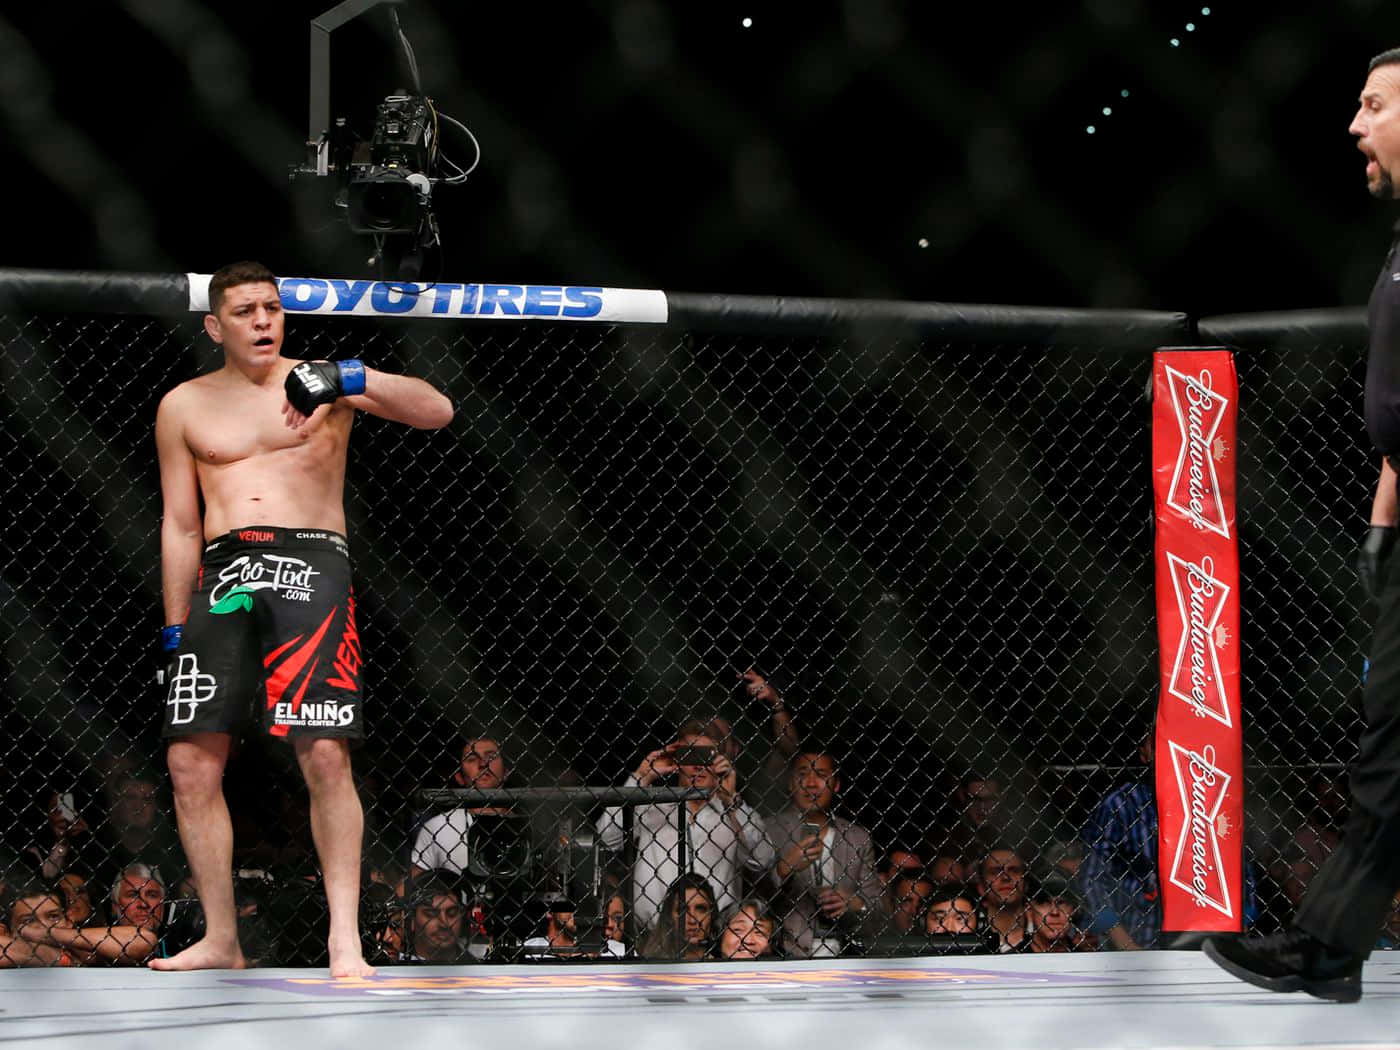 Nick Diaz On The Platform Within The Cage Wallpaper